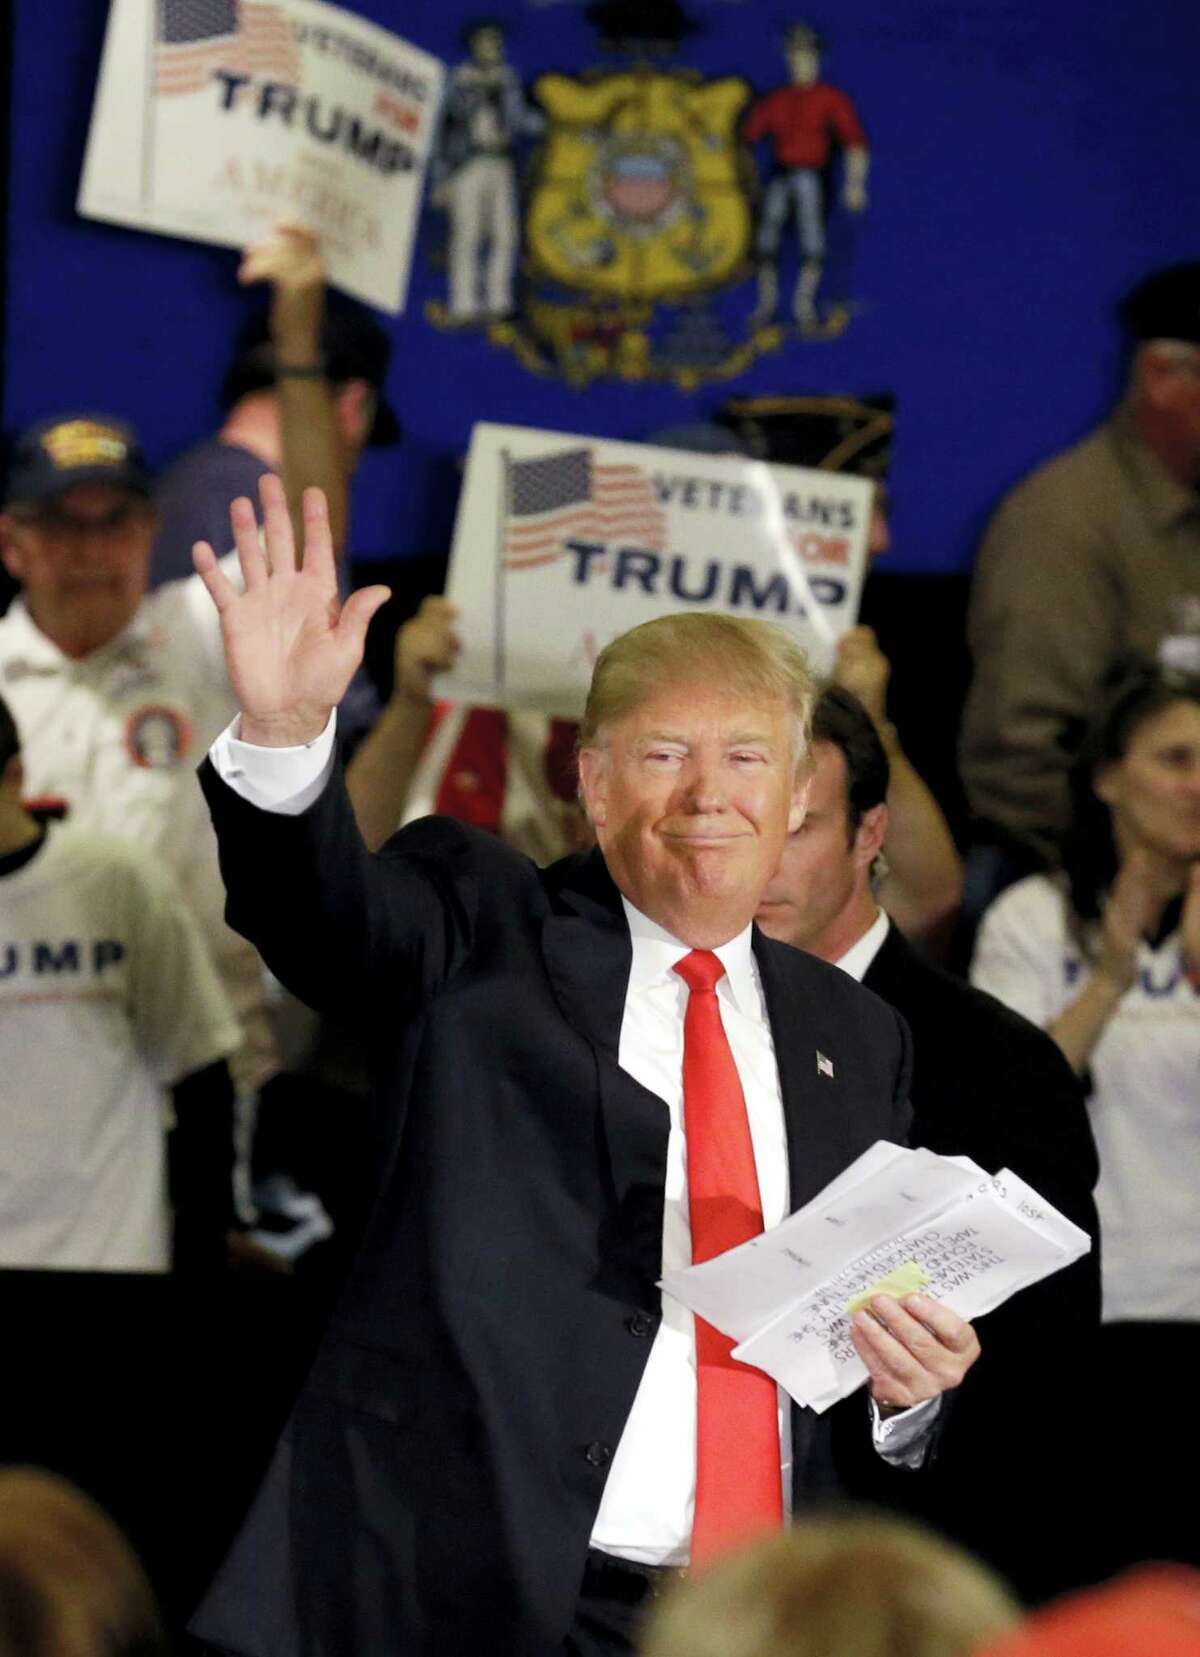 Republican presidential candidate Donald Trump waves to supporters as he leaves a campaign stop Wednesday, March 30, 2016, in Appleton, Wis.